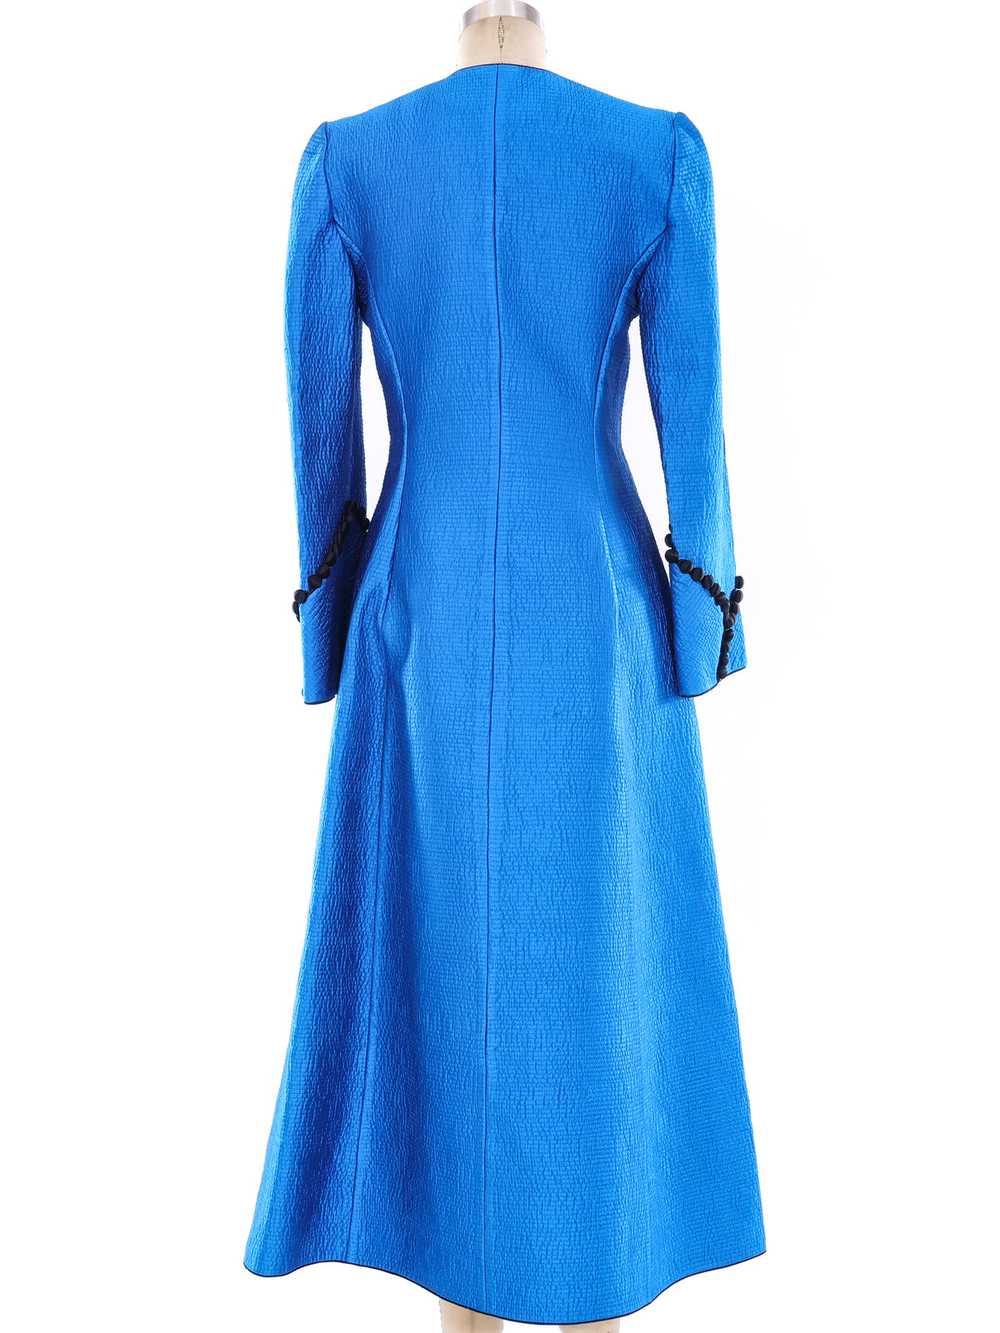 Mary McFadden Quilted Coat Dress - image 4